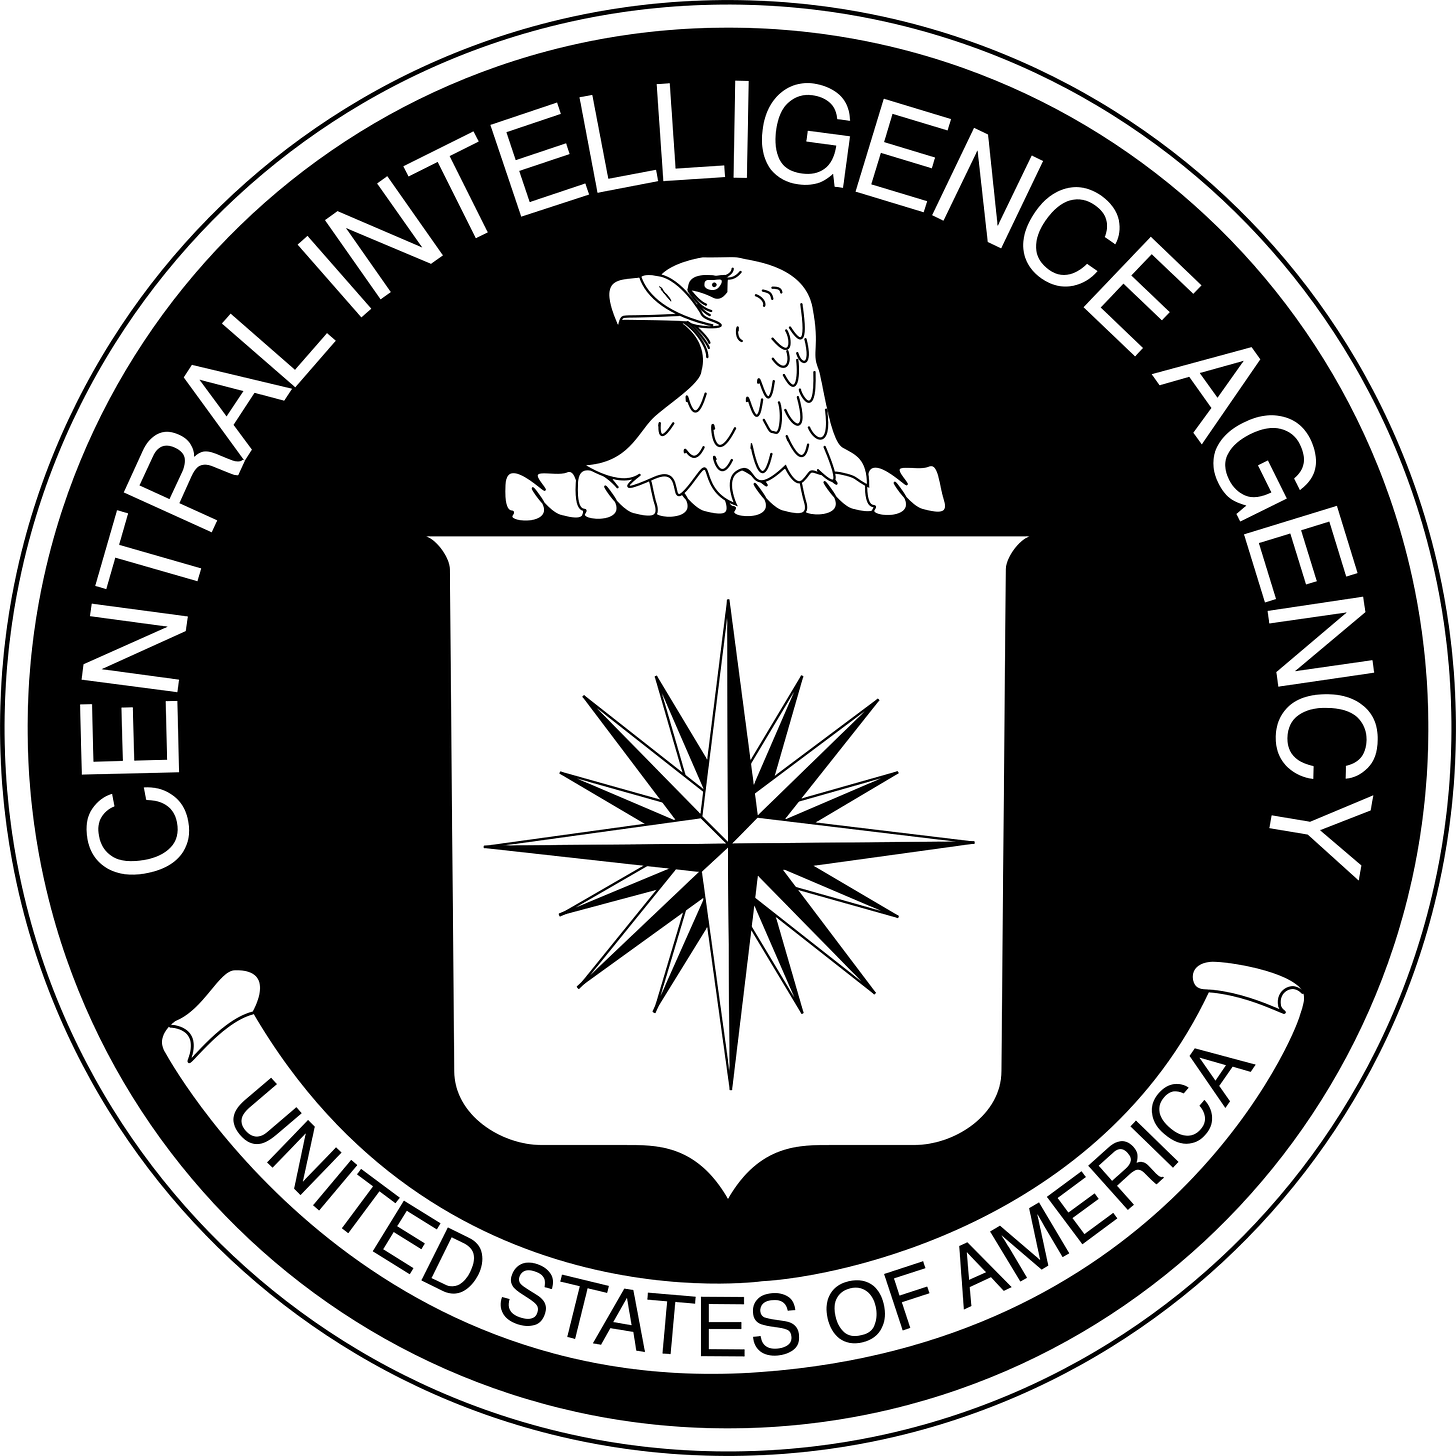 File:Seal of the Central Intelligence Agency (B&W).svg - Wikipedia